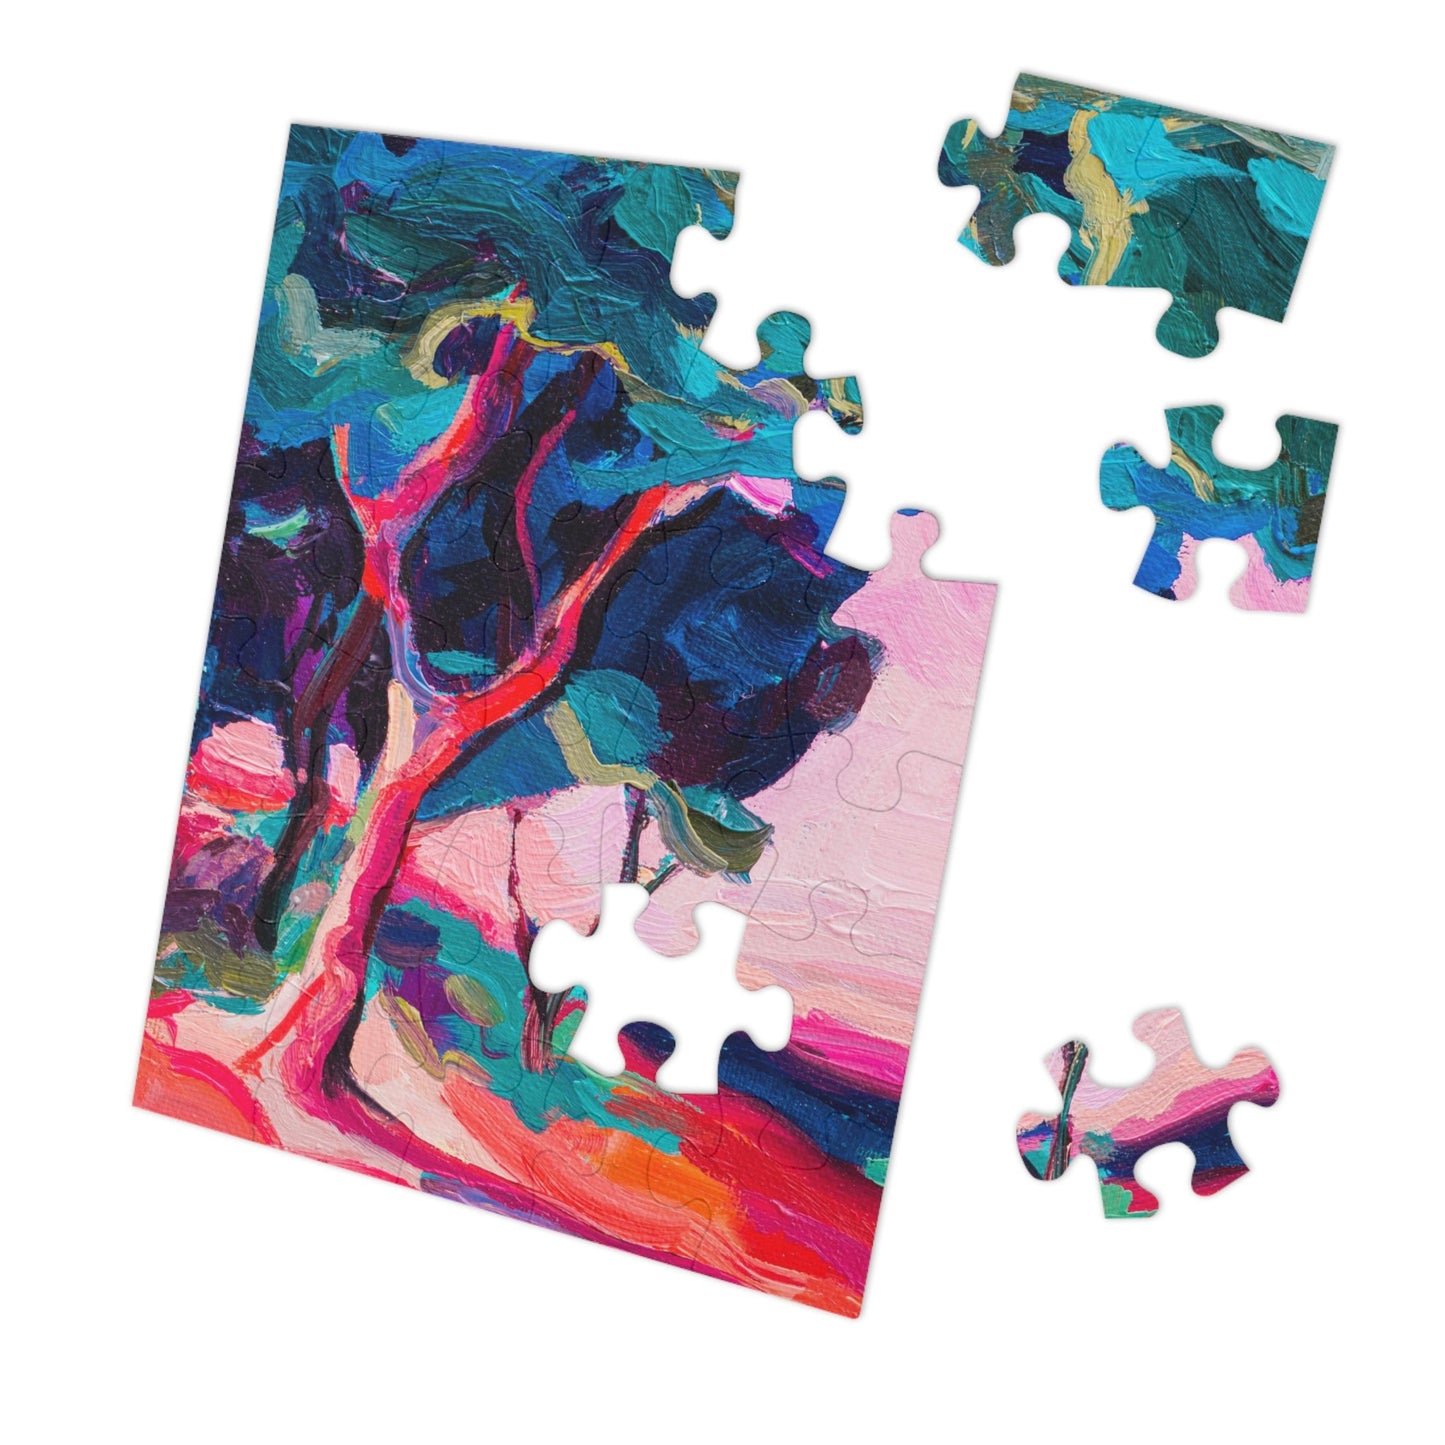 “At Dusk” by Leah Luria Jigsaw Puzzle